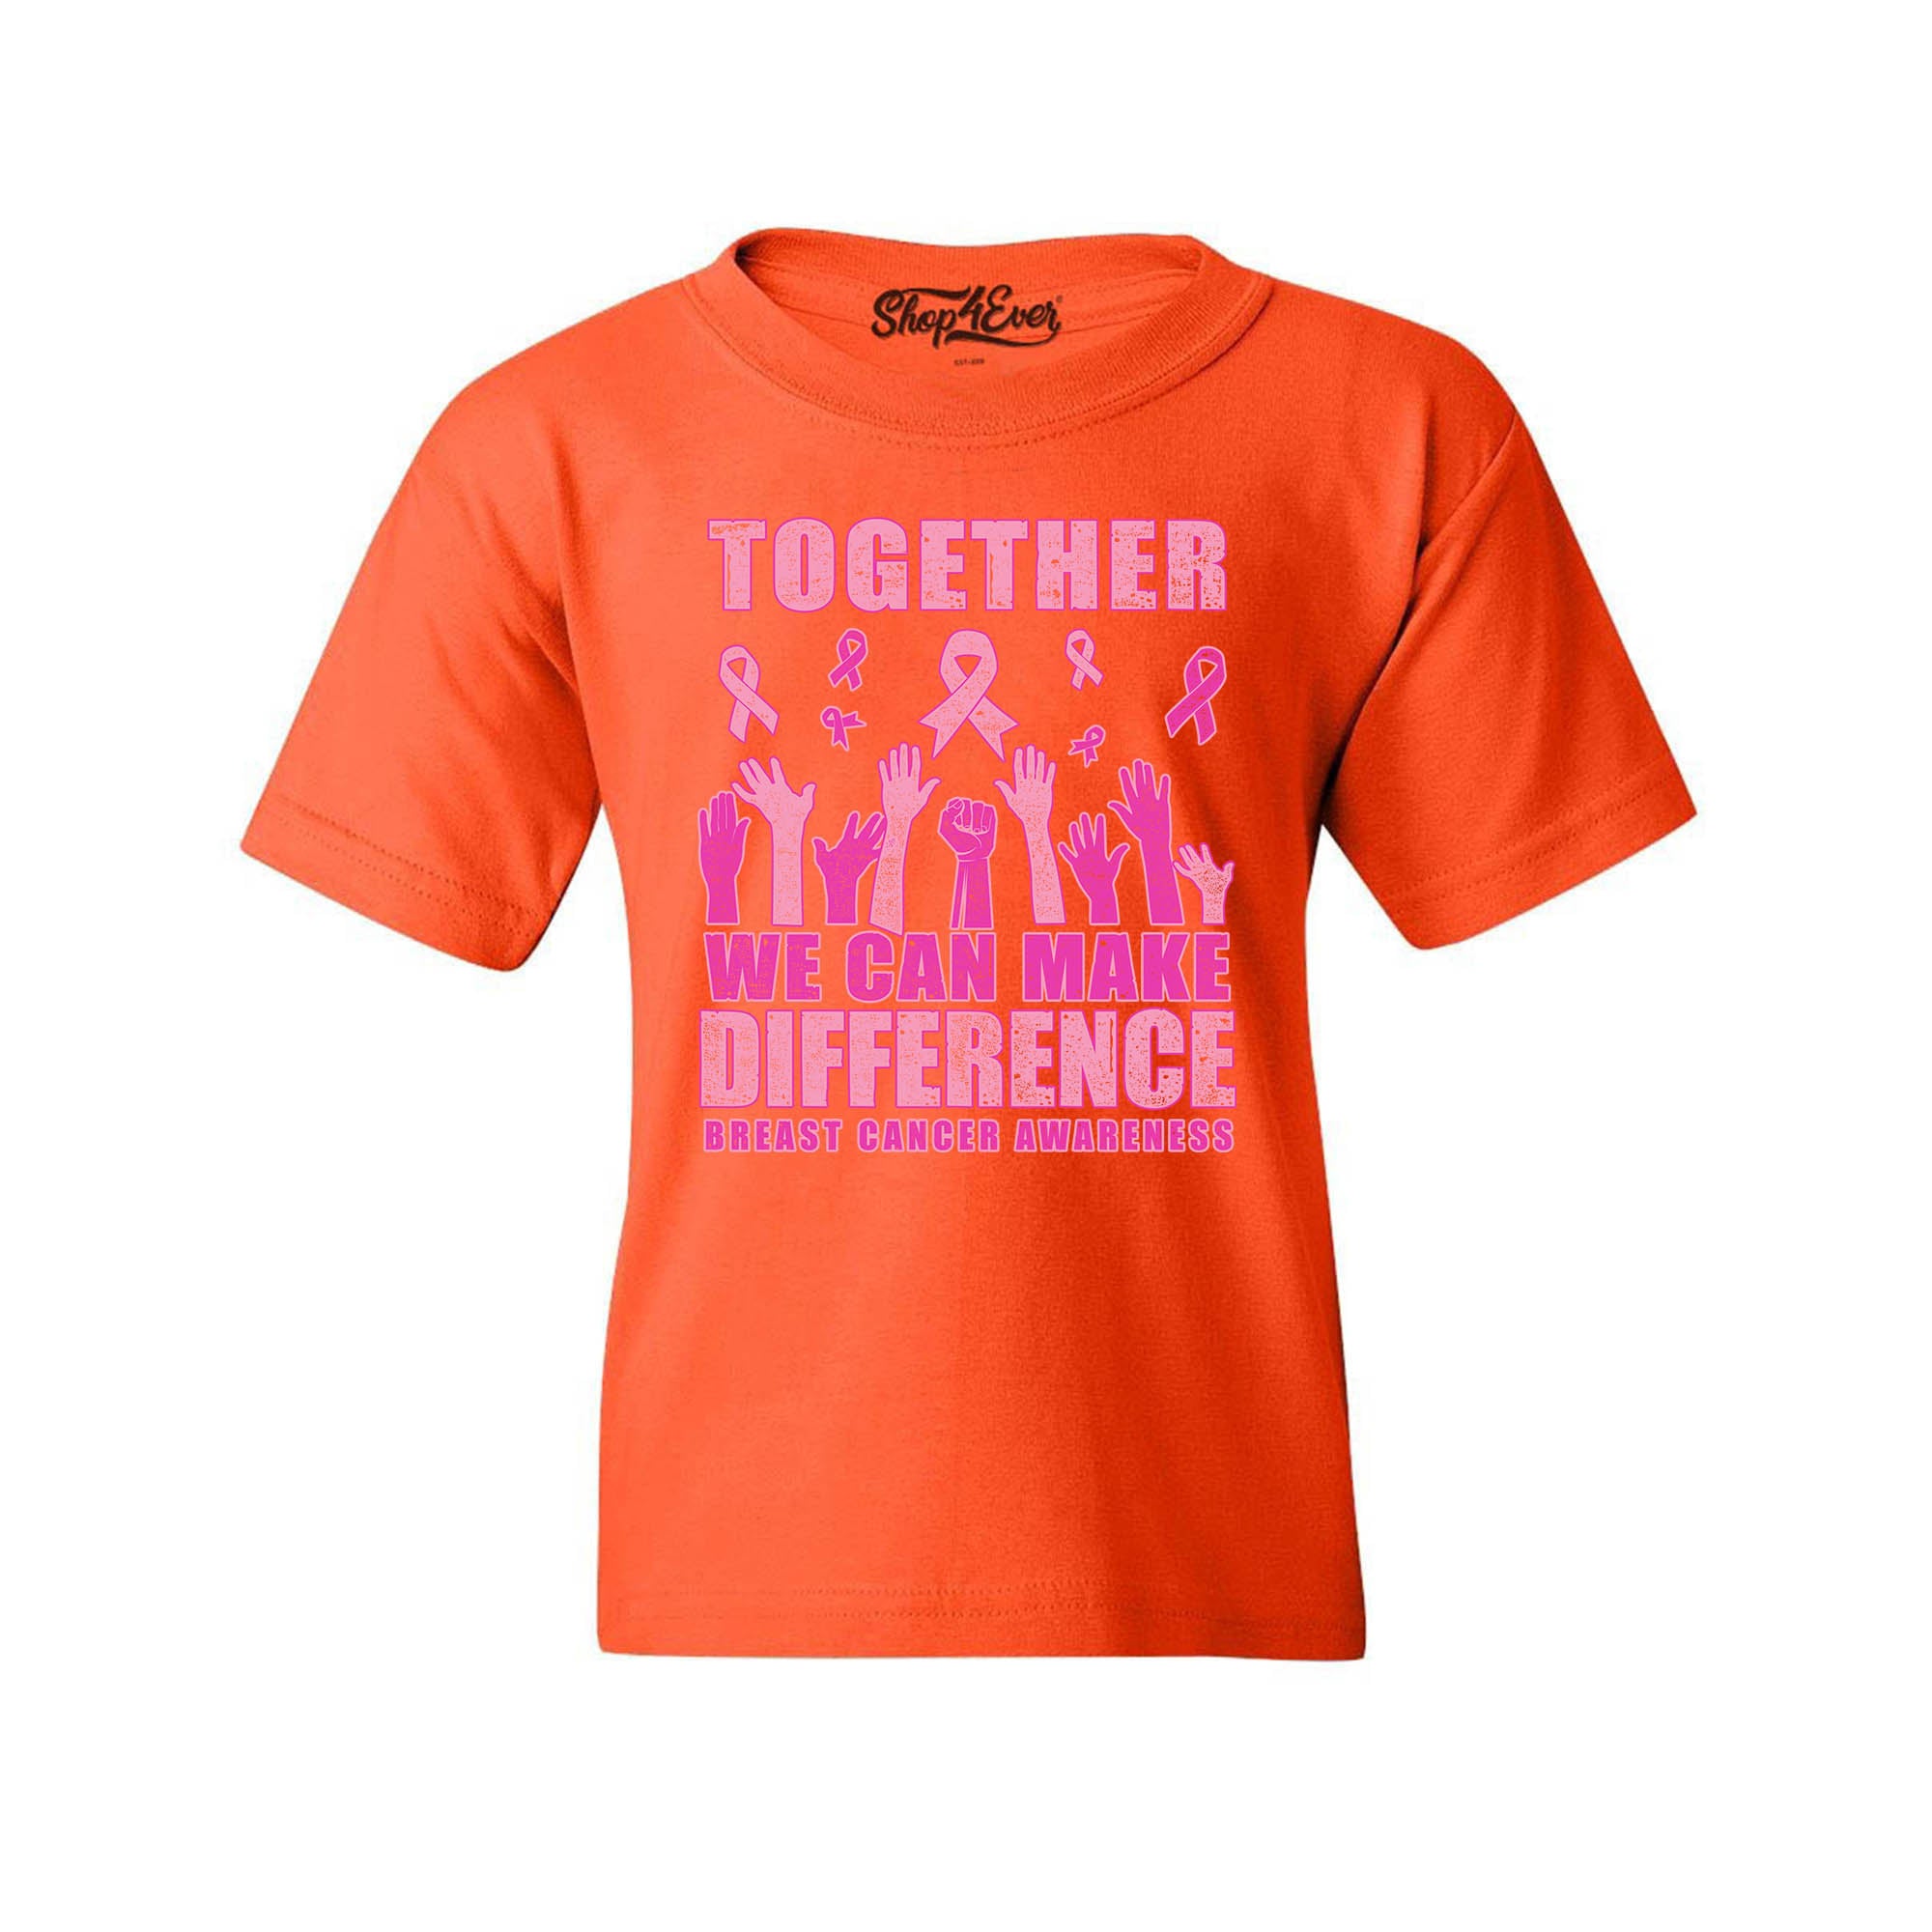 Together We Can Make A Difference Youth's T-Shirt Breast Cancer Awareness Child's Tee